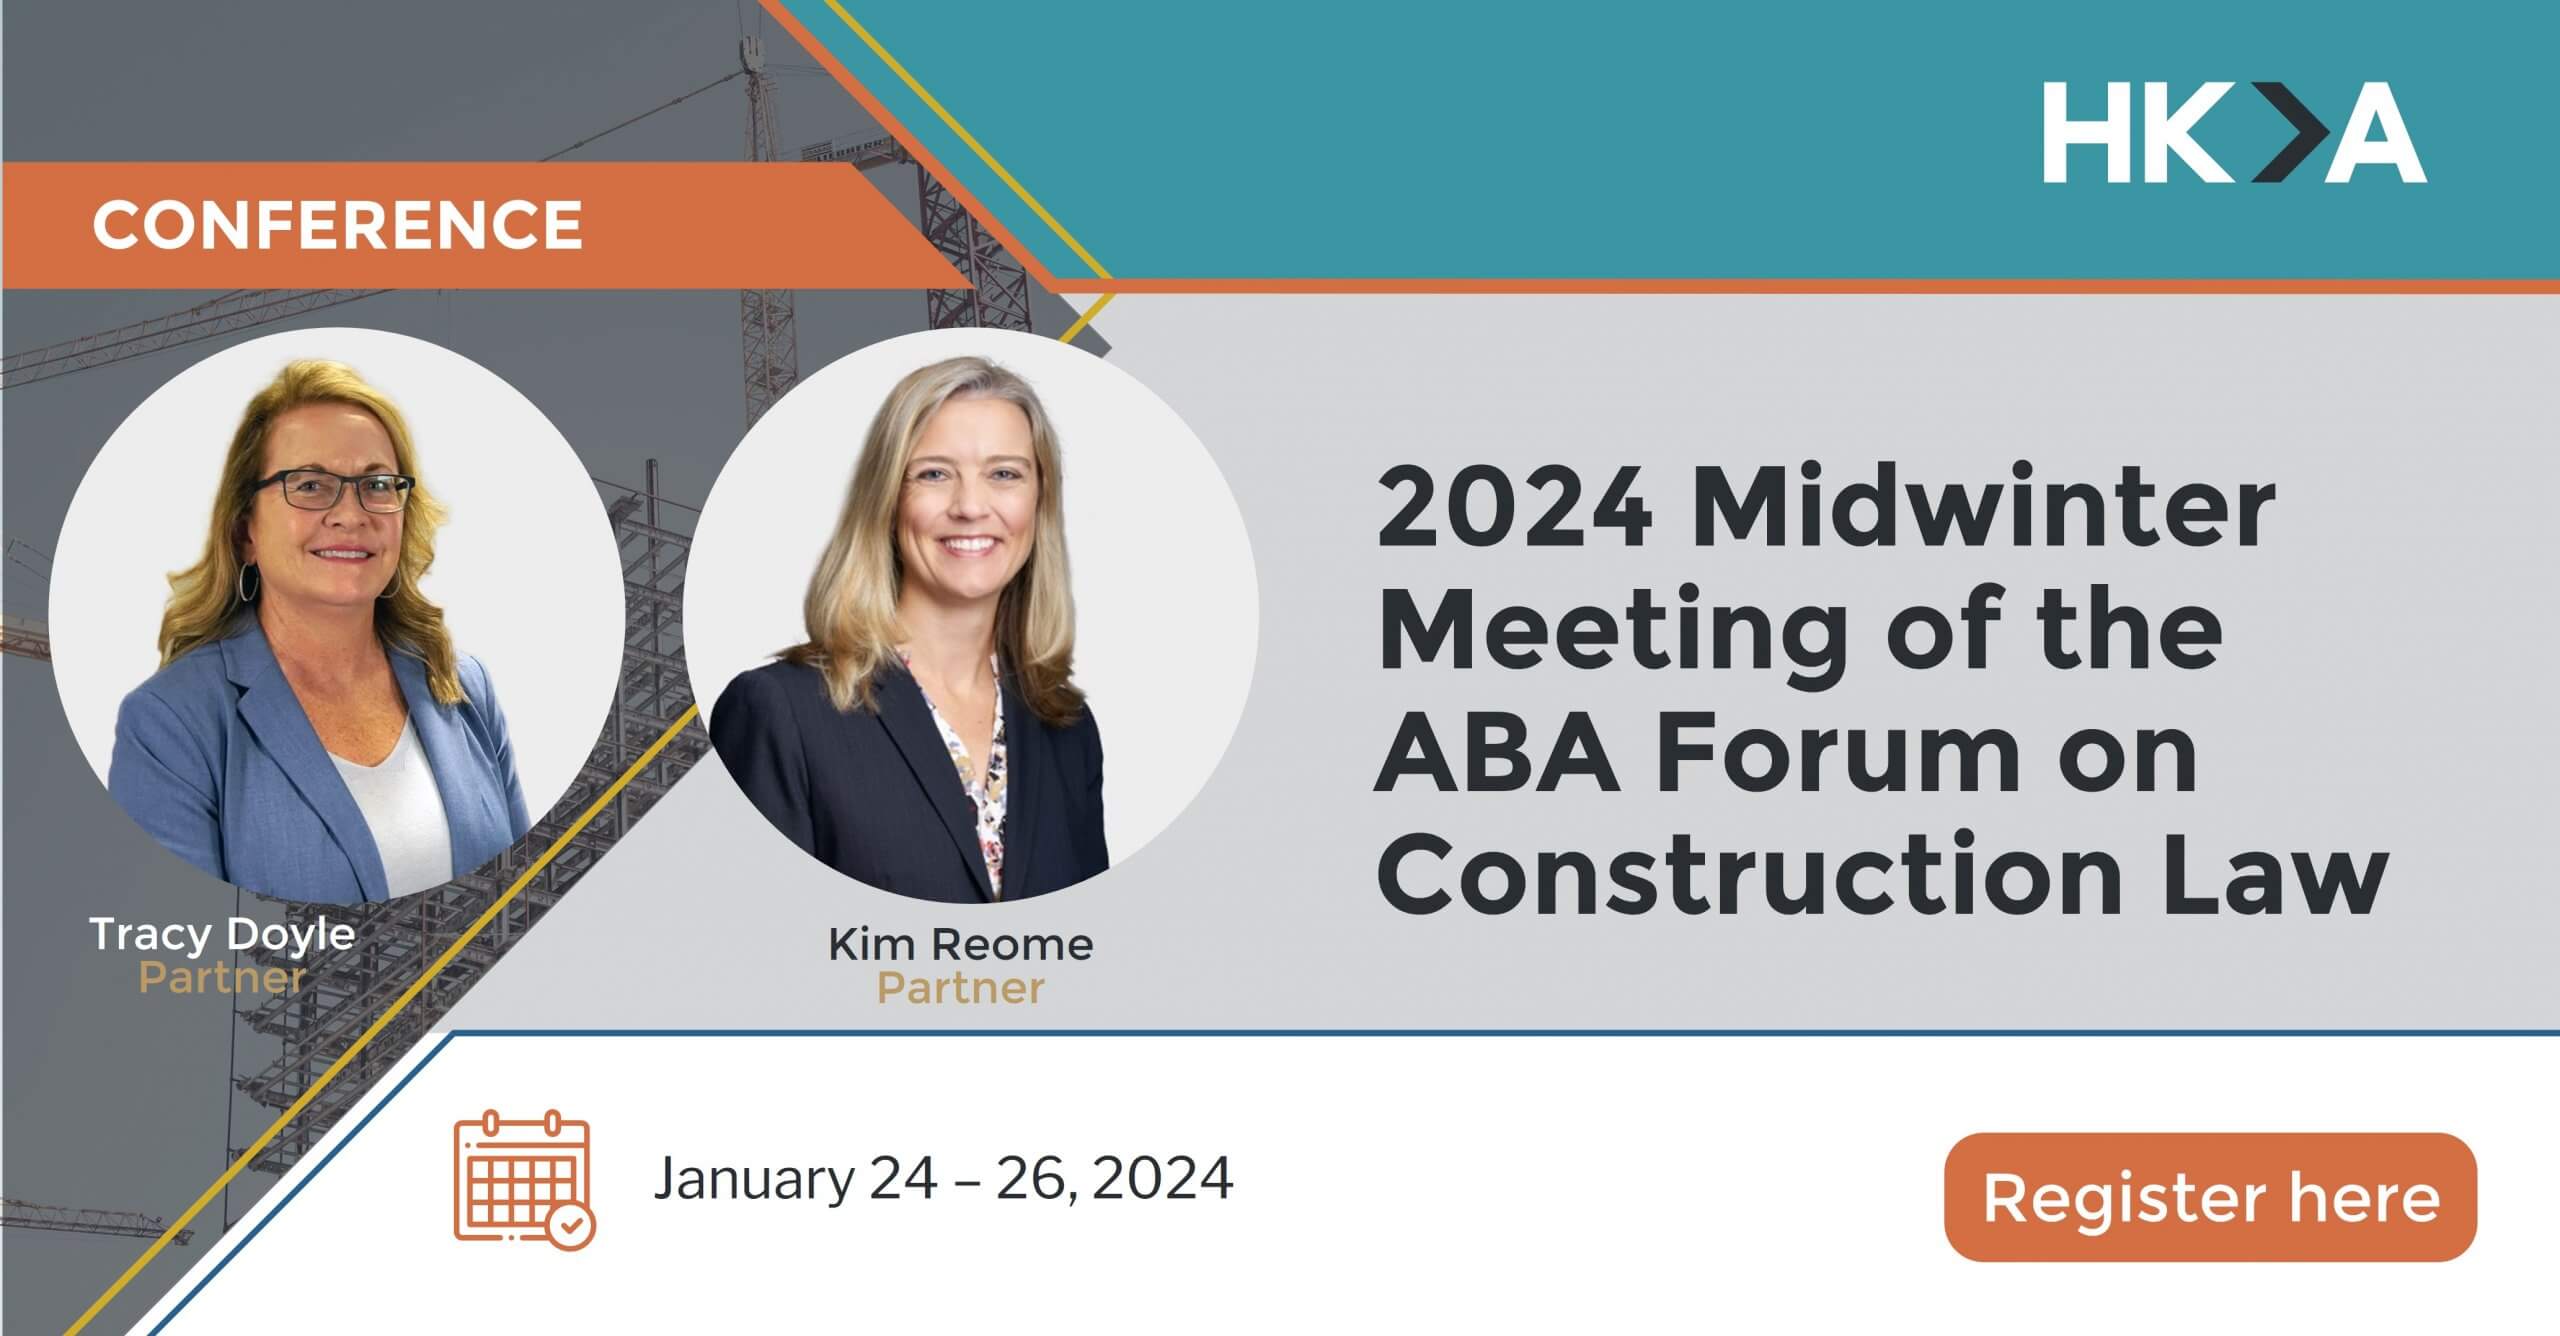 2024 Midwinter Meeting of the ABA Forum on Construction Law HKA